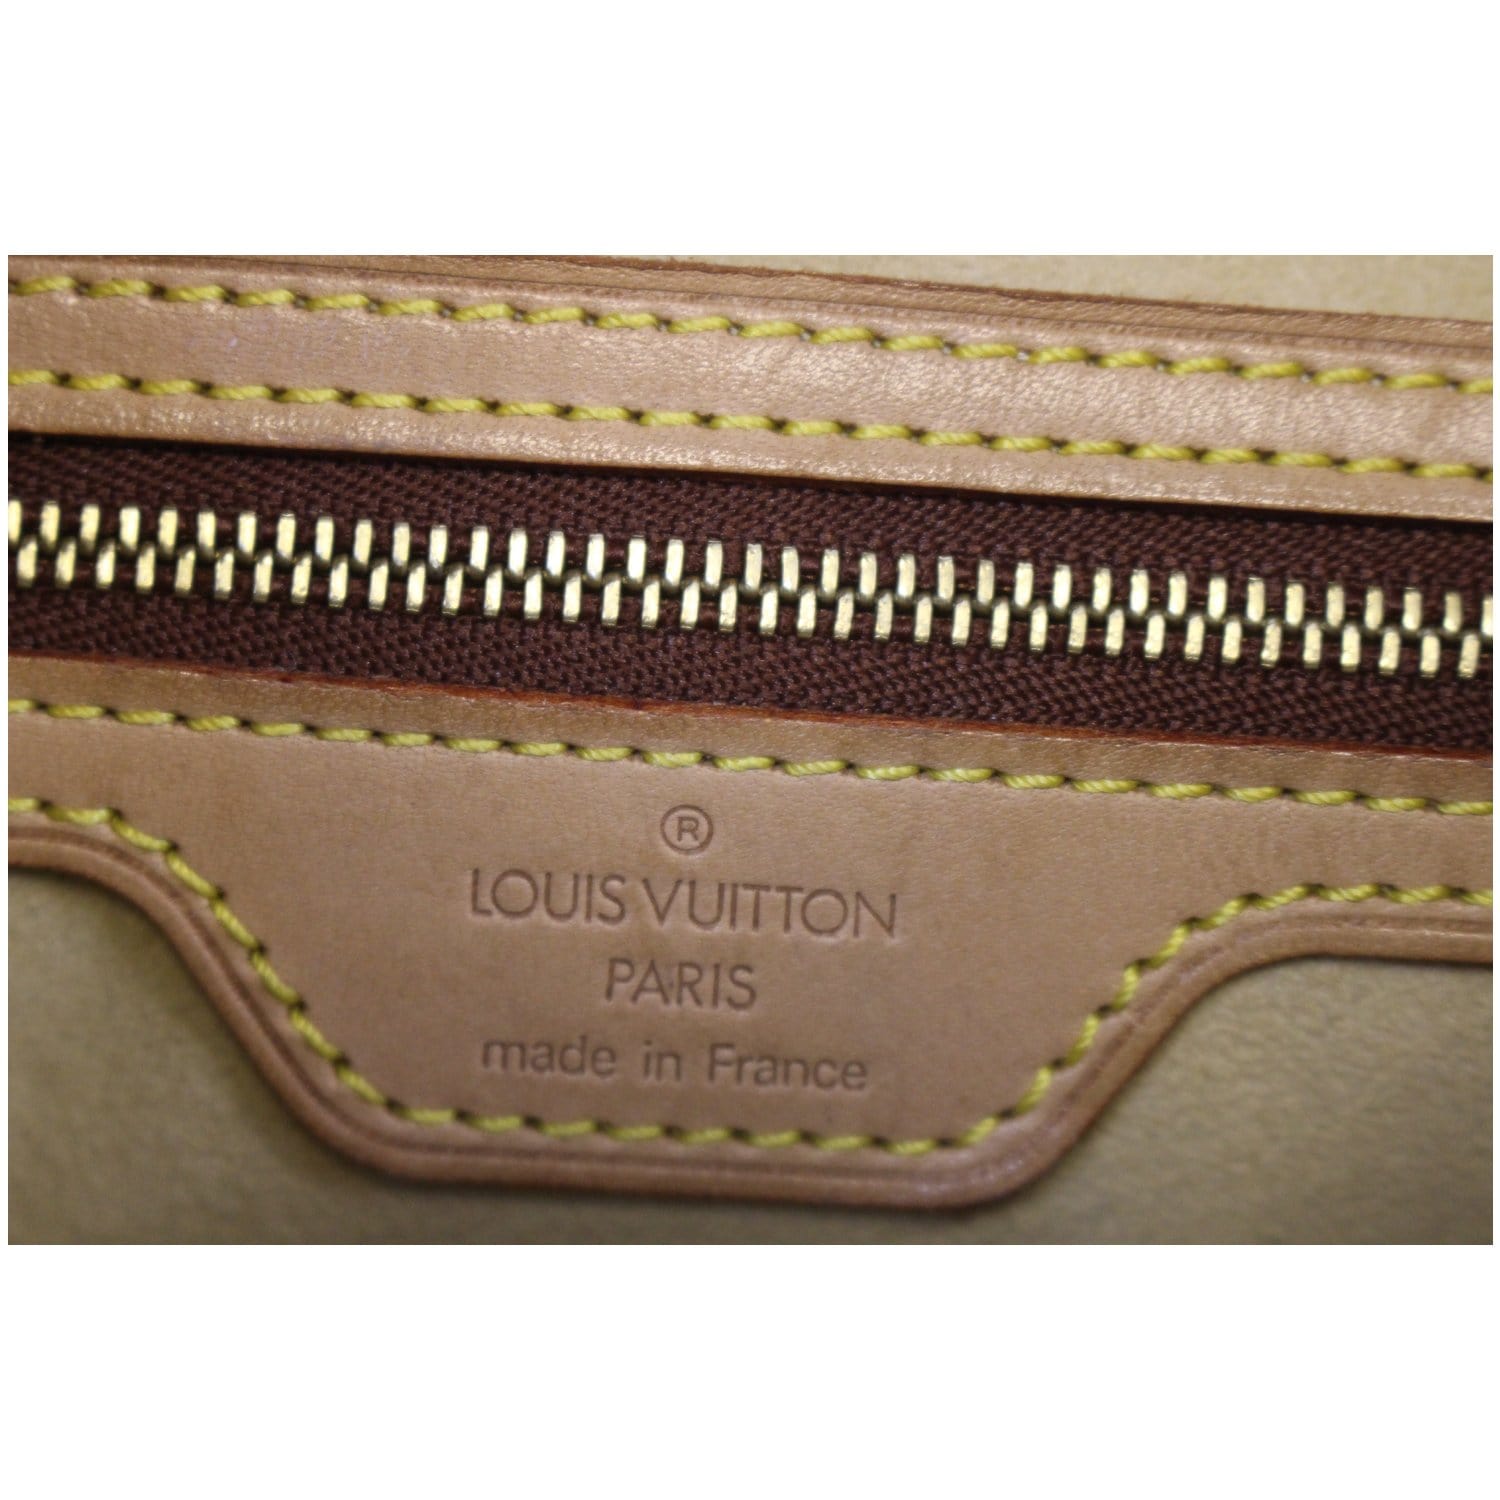 ✨DISCONTINUED✨ LOUIS VUITTON LOOPING GM